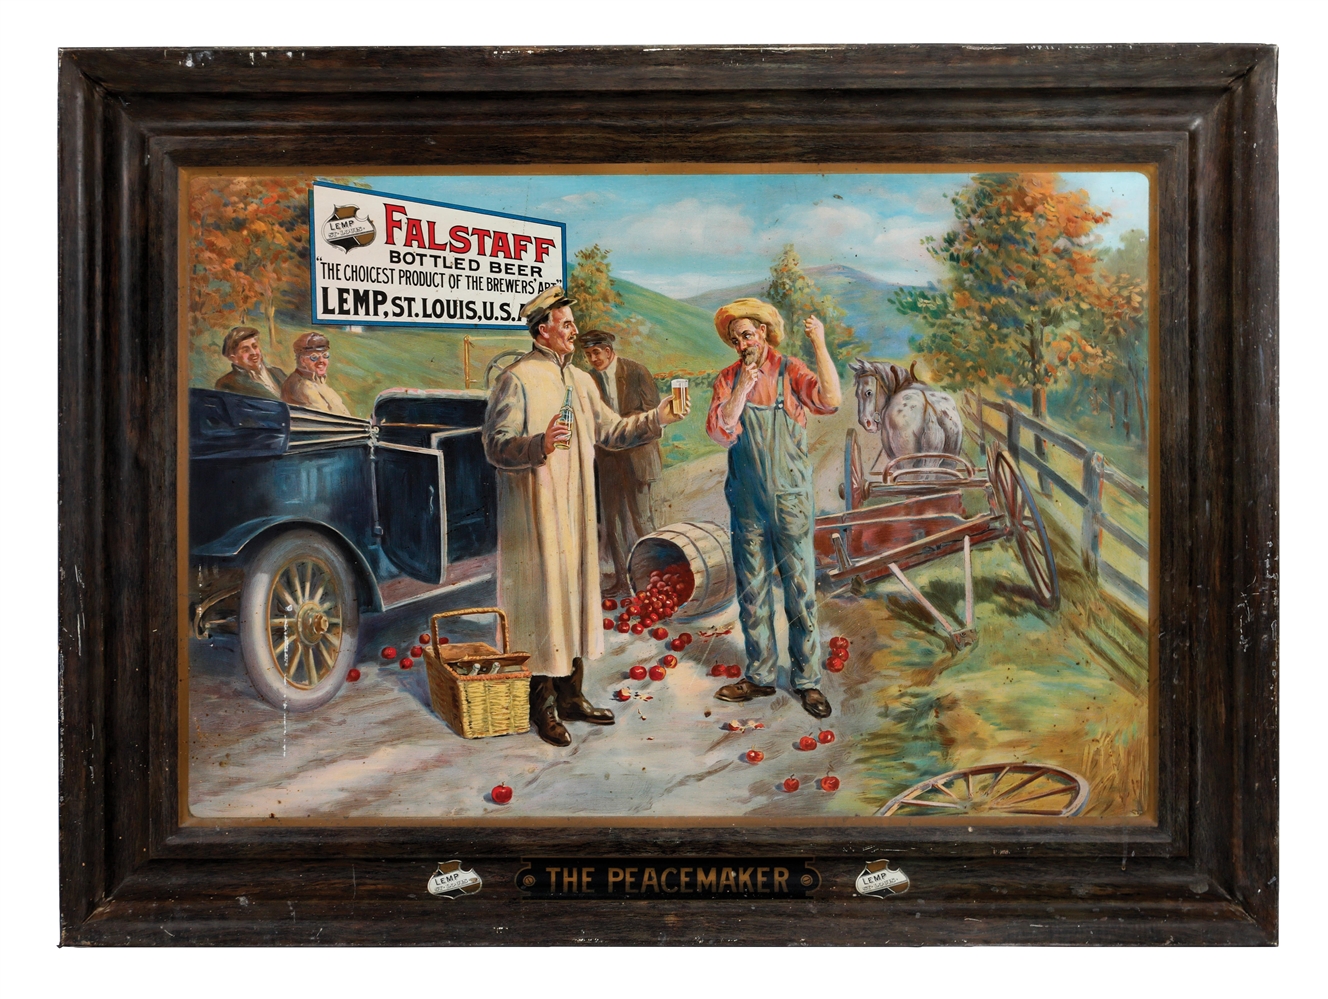 "FALSTAFF BOTTLED BEER" SELF-FRAMED TIN LITHOGRAPH W/ EARLY AUTOMOBILE DRAGON GRAPHIC